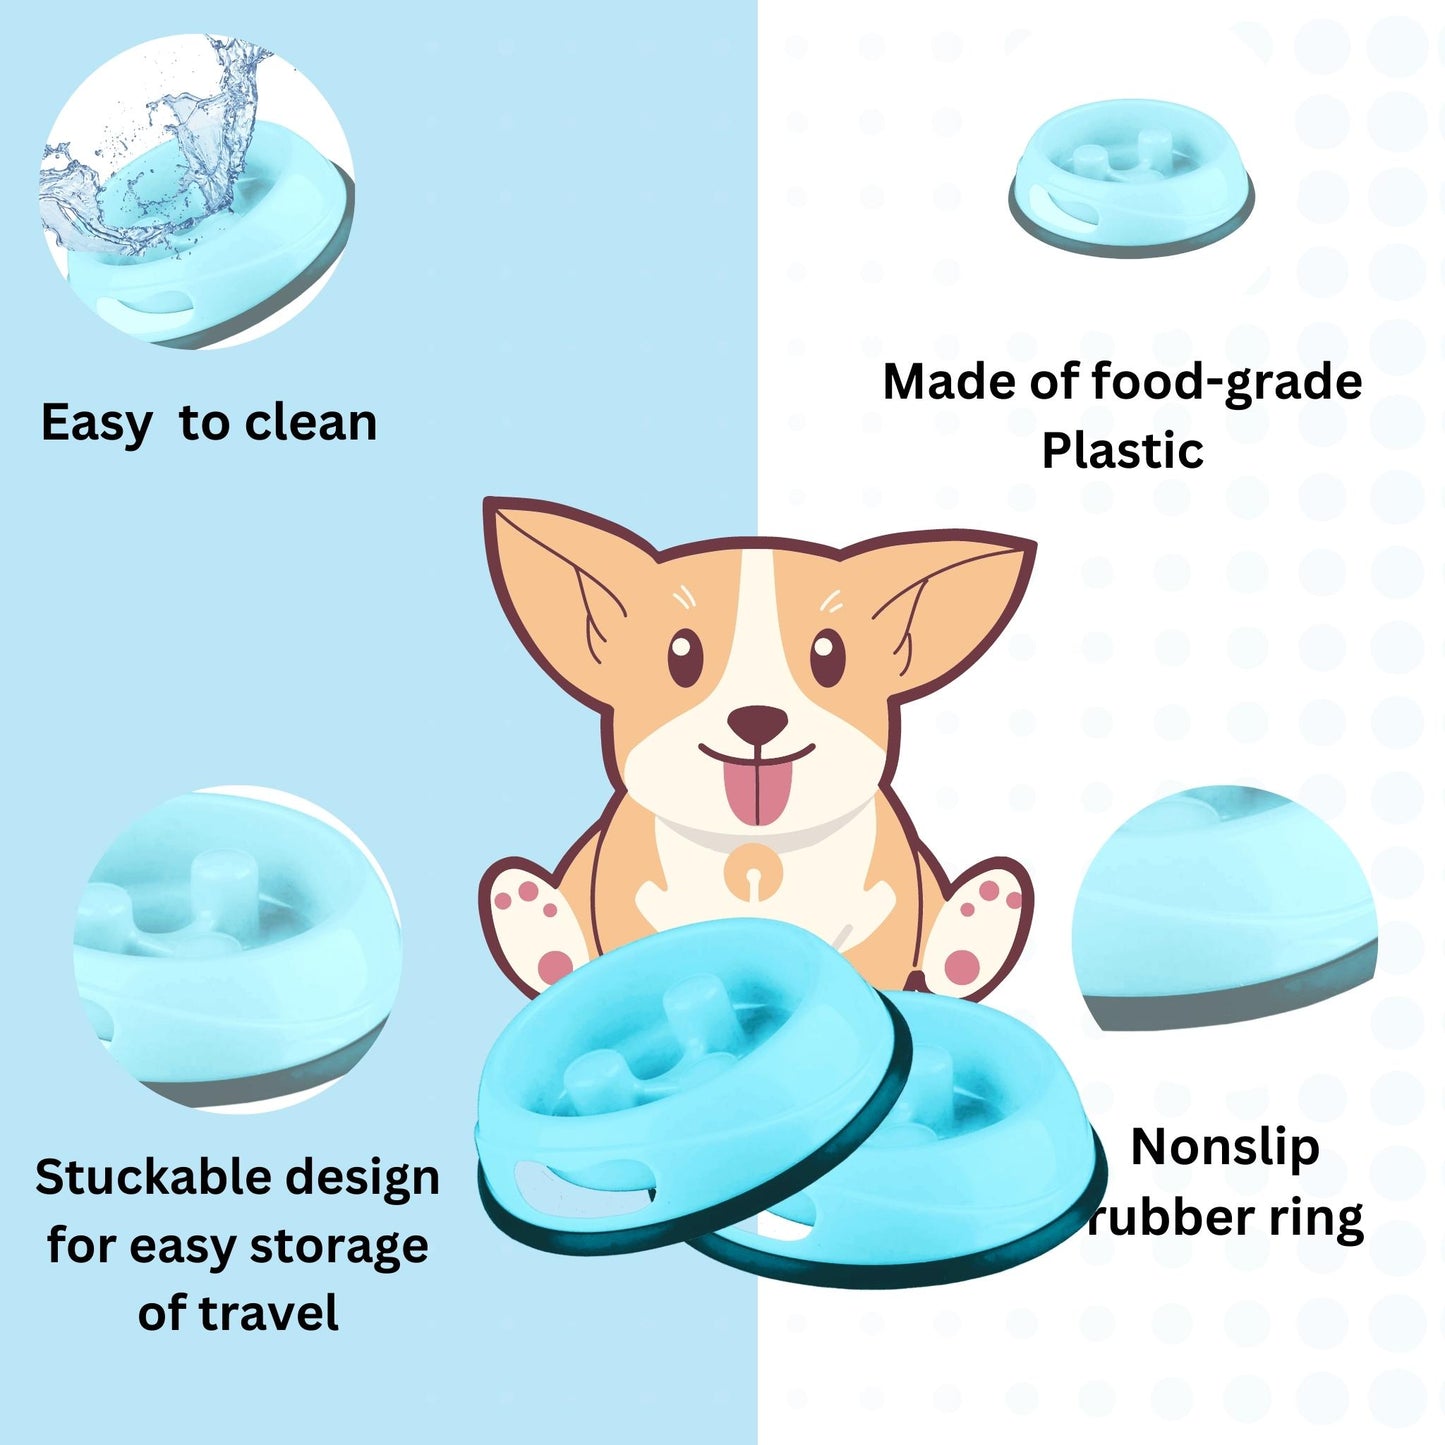 Foodie Puppies Pet Bowl Slow Feeder for Dogs & Cats - 900ml, Sky Blue